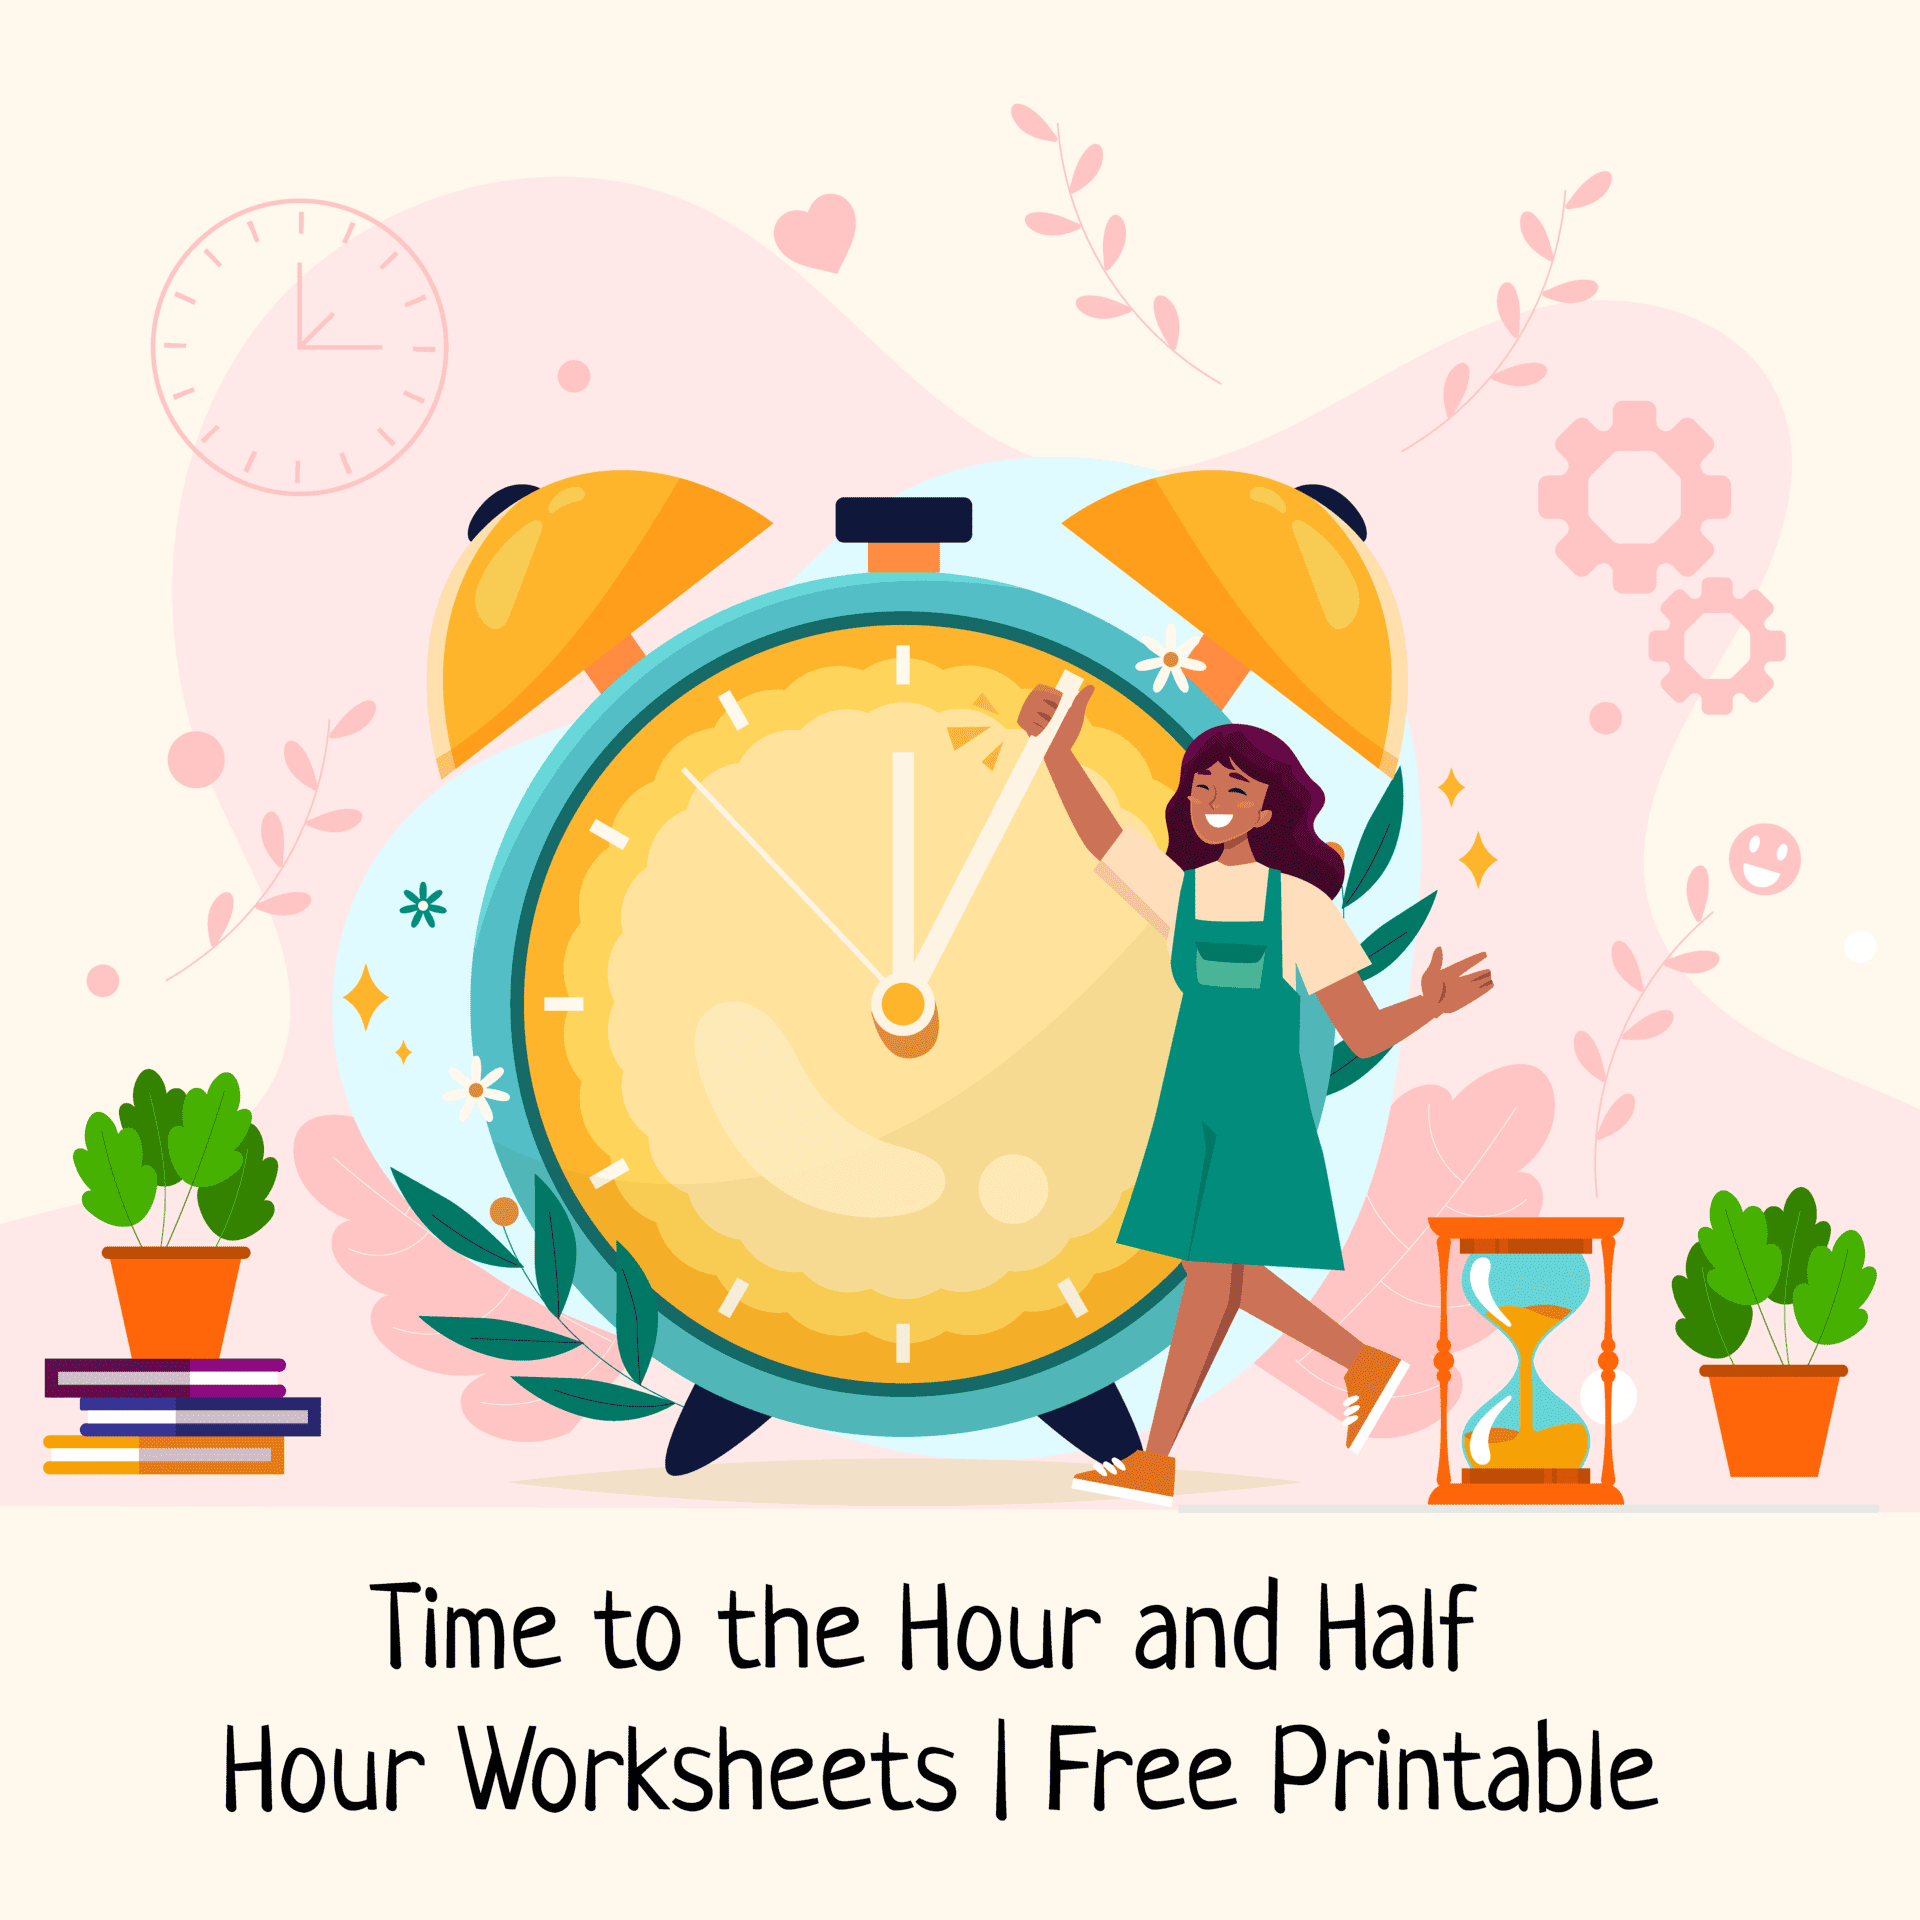 11 Free Time to the Hour and Half Hour Worksheets